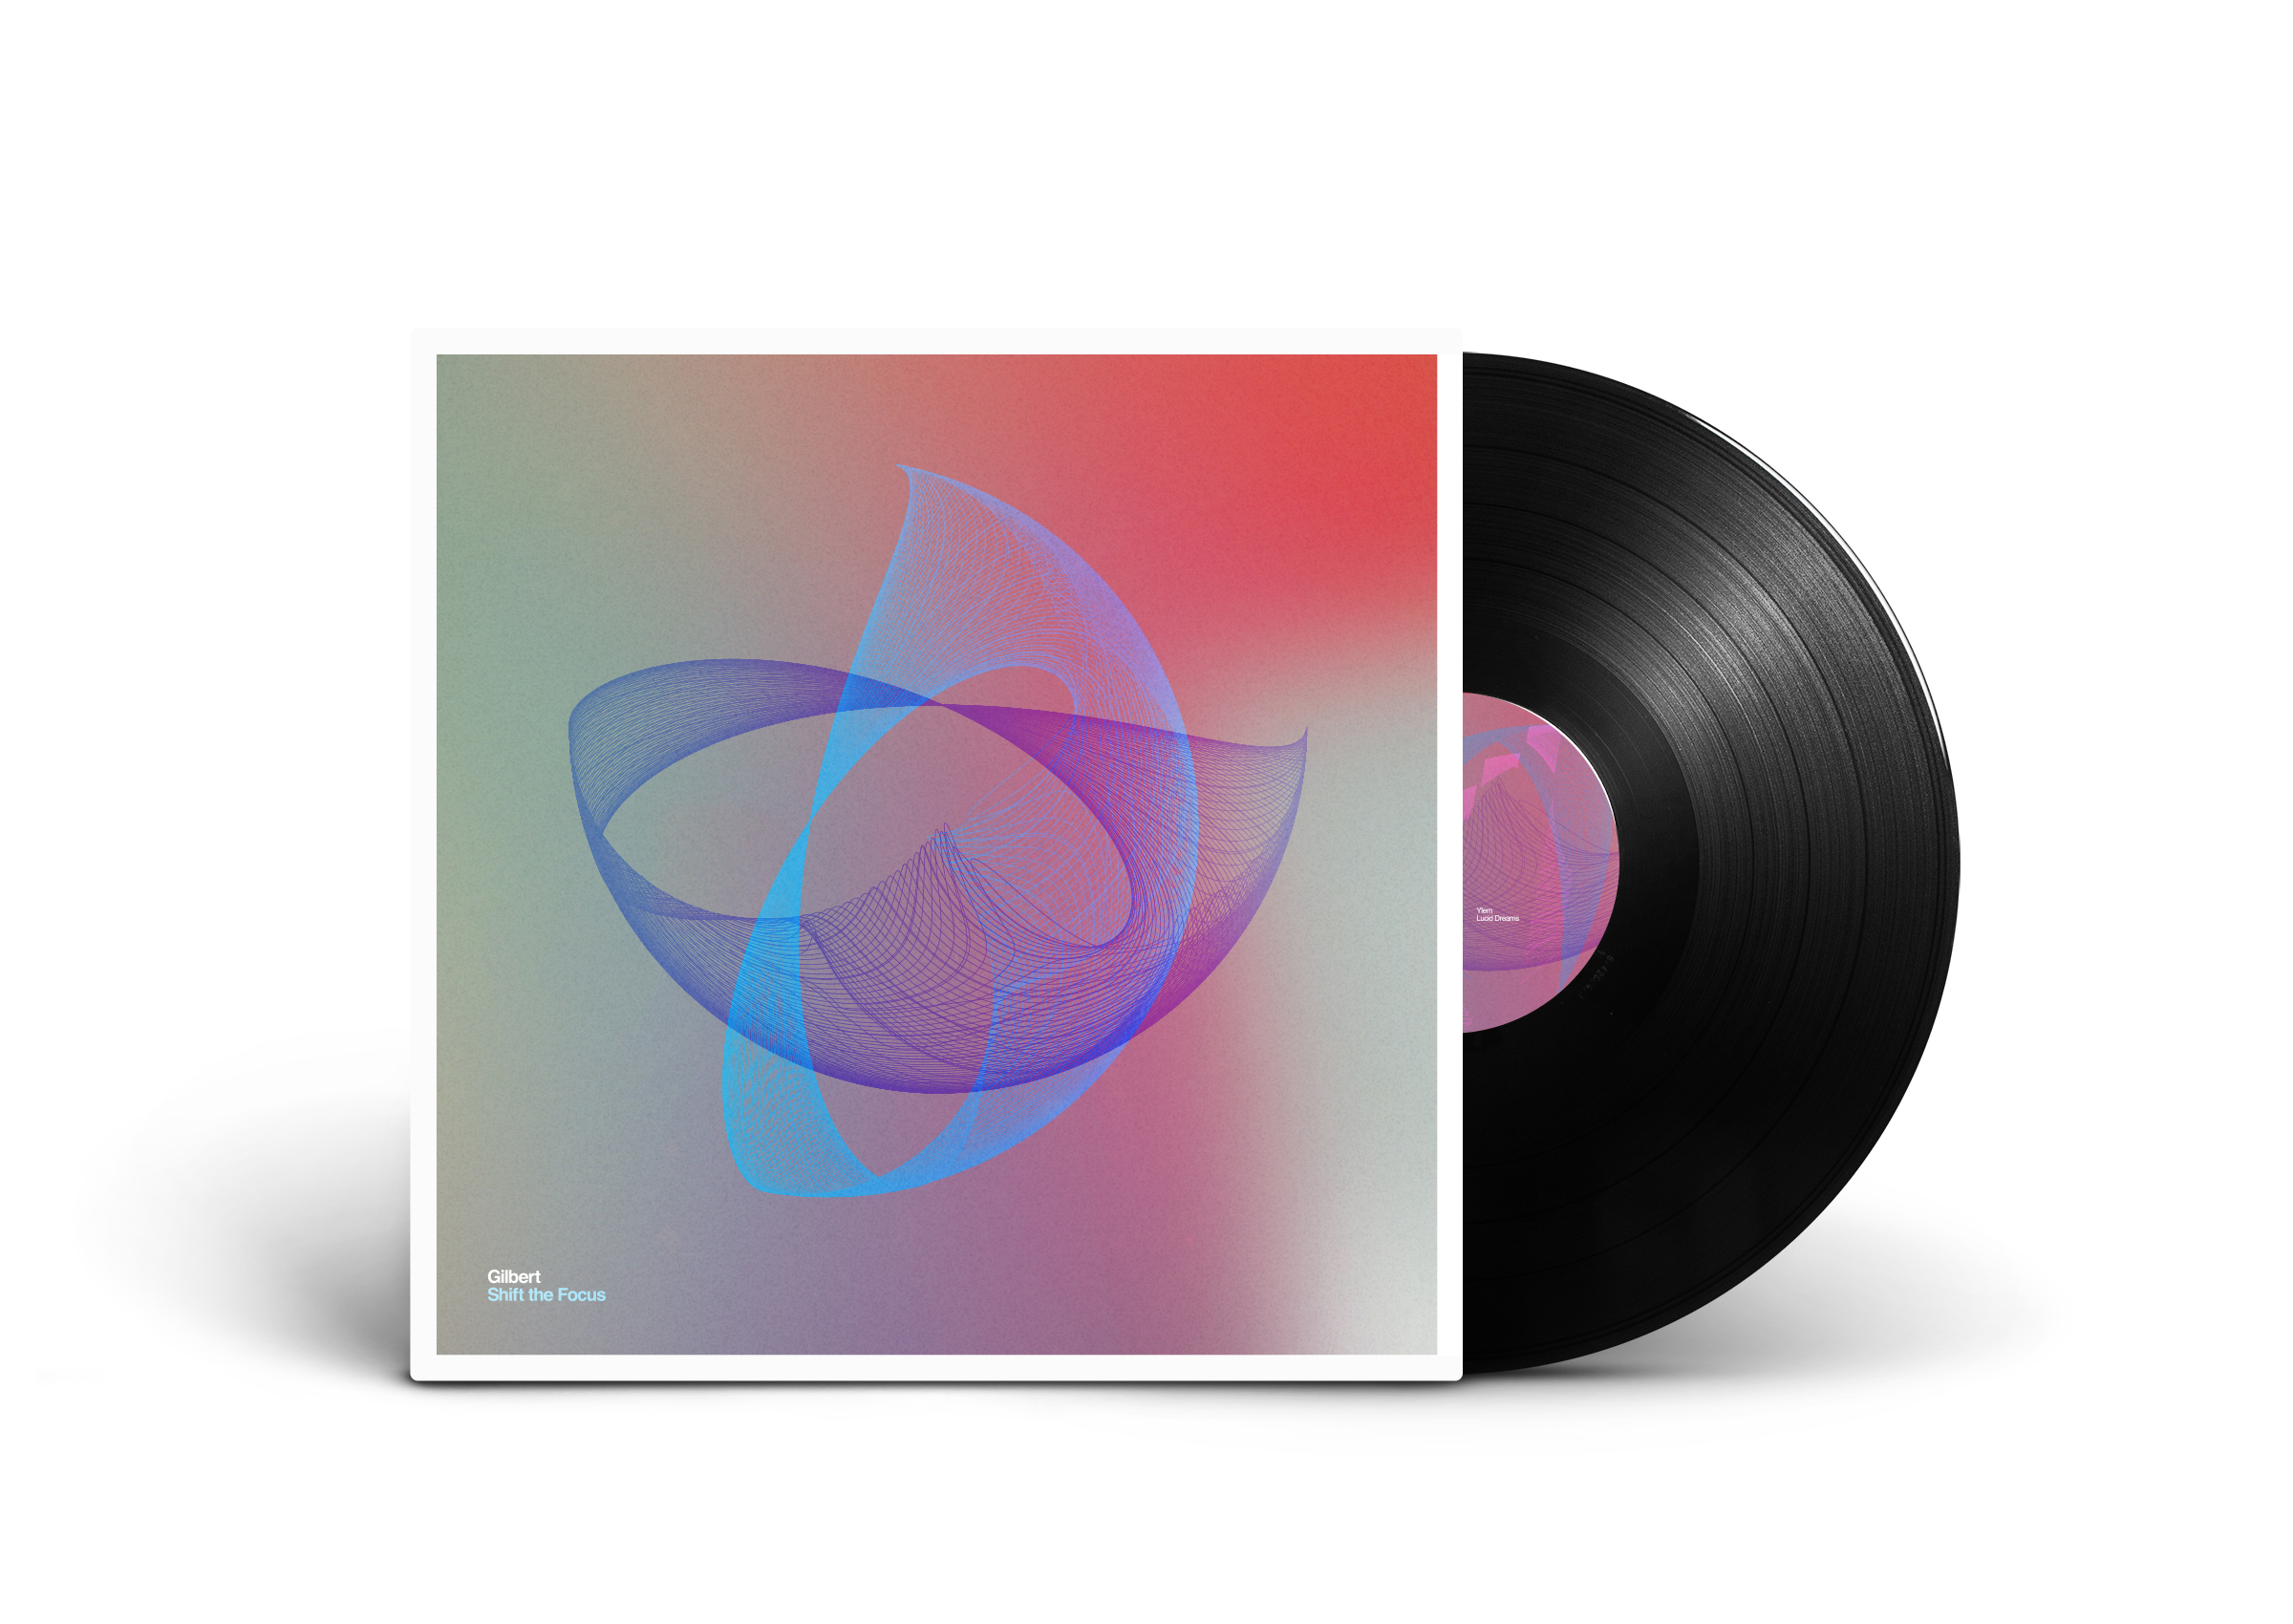 Bespoke type on various vinyl cover designs for 030303 record label